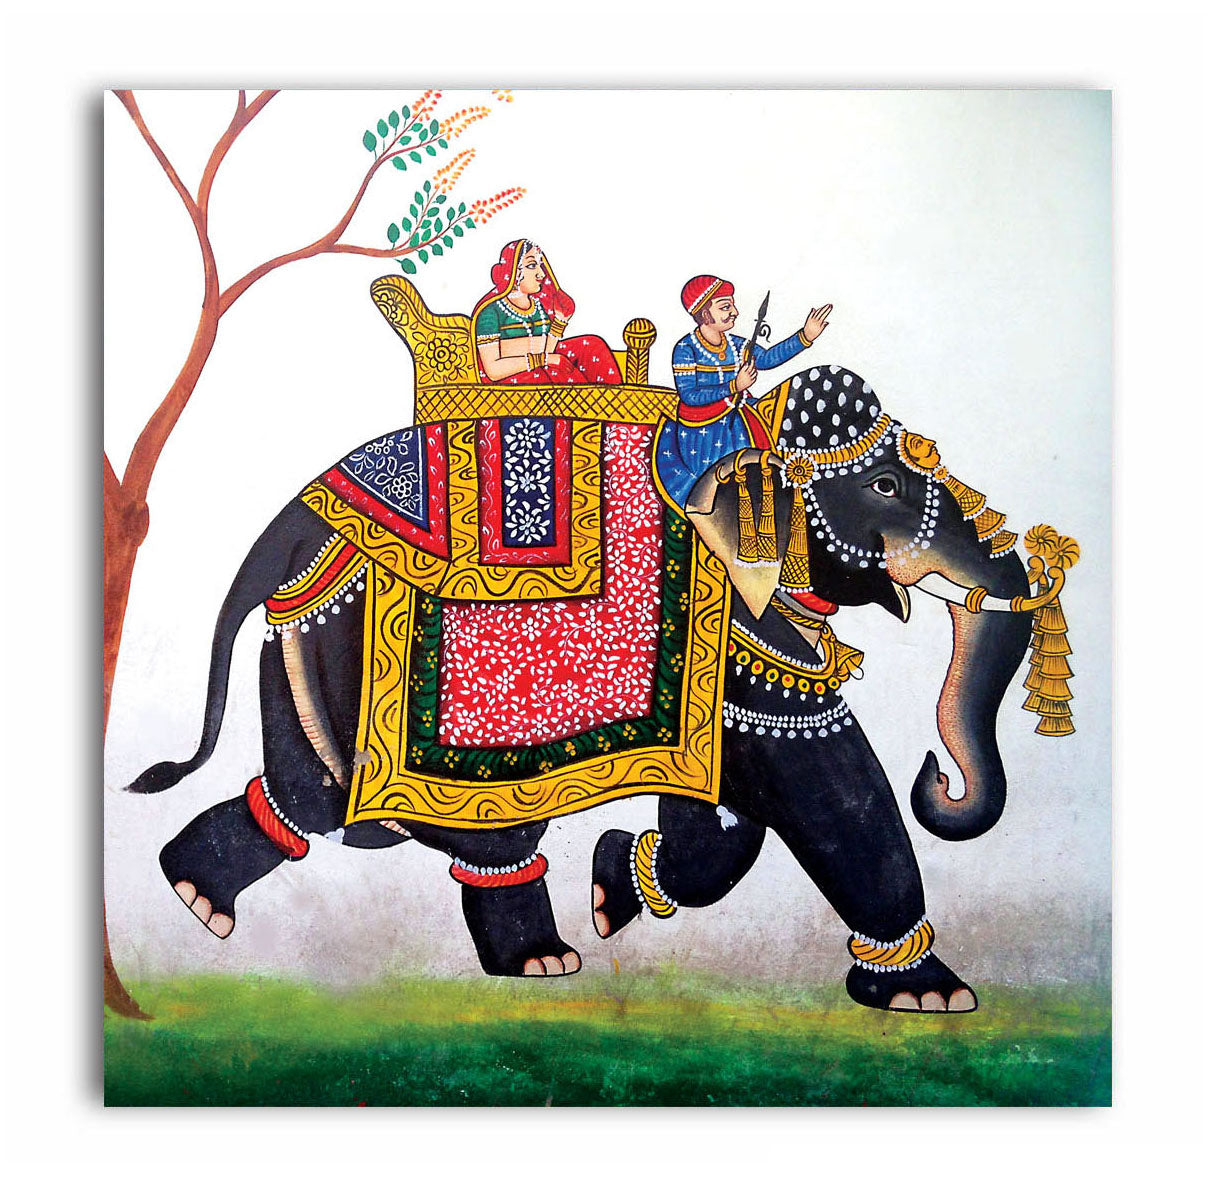 Queen On Elephant - Unframed Canvas Painting